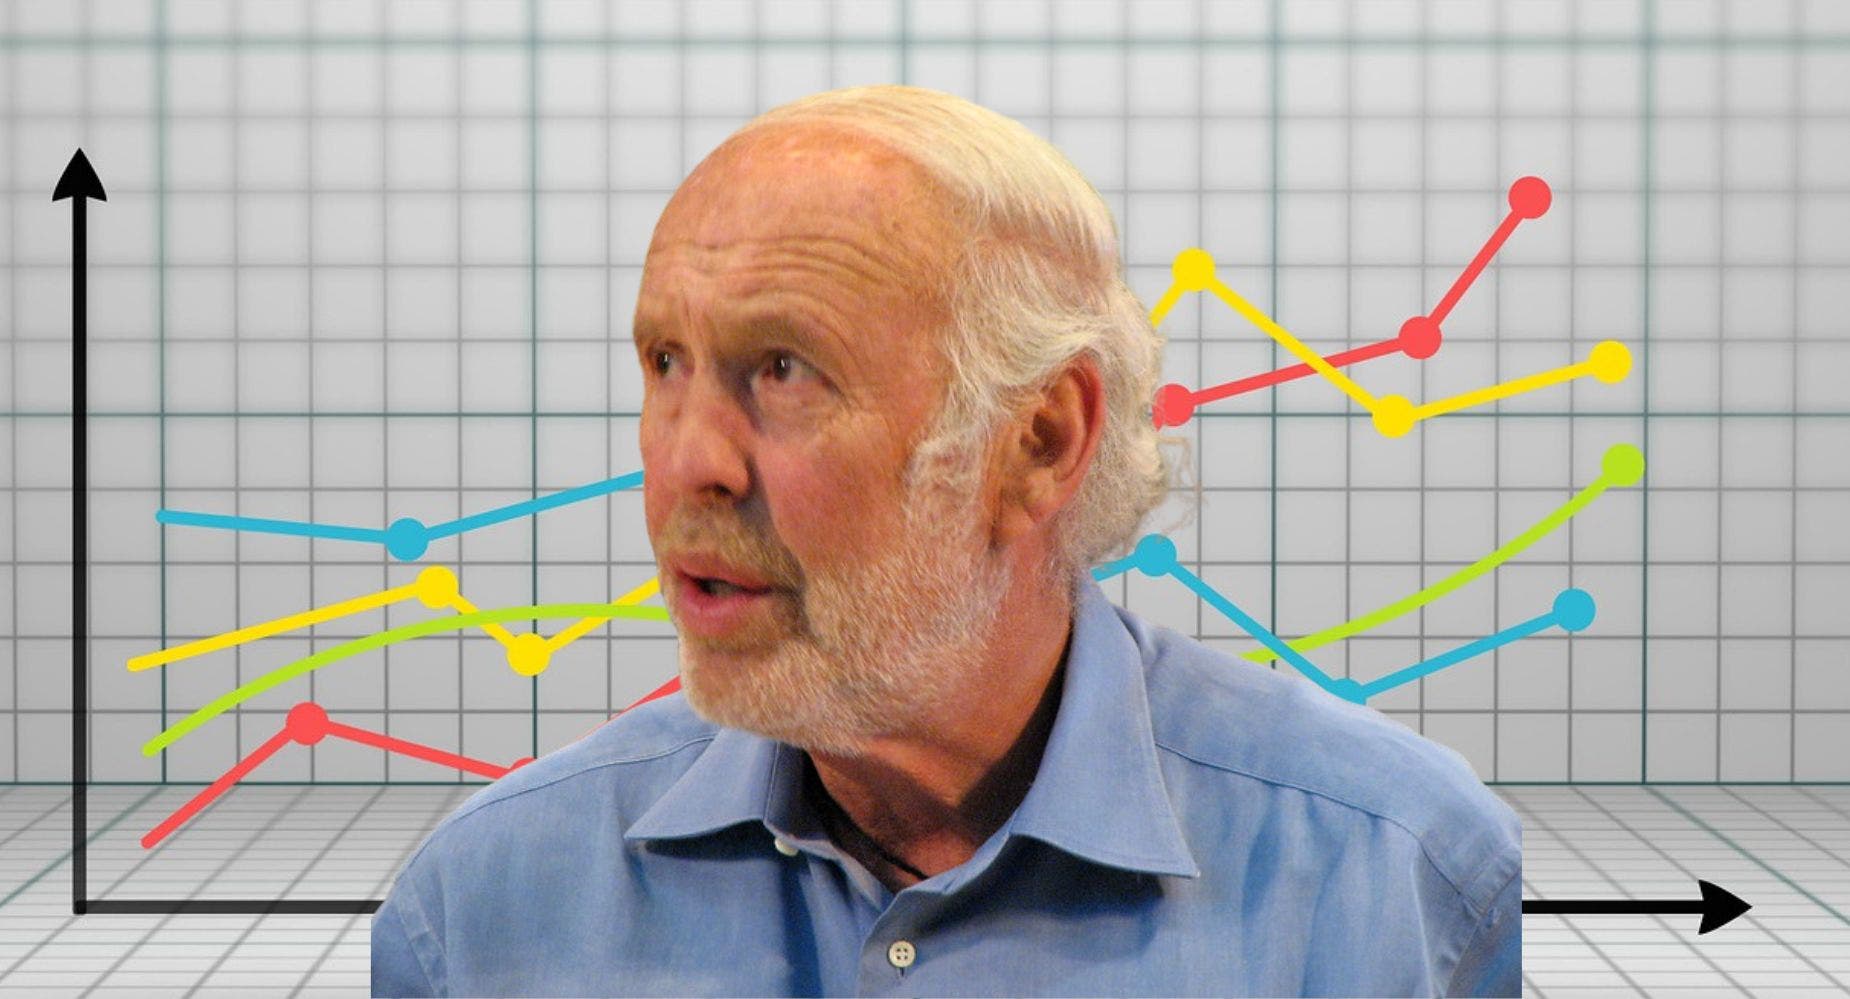 Jim Simons 'The Man Who Solved The Market' Sold 3 Healthcare Dividend Payers, But Upped Stake In This One By 153%